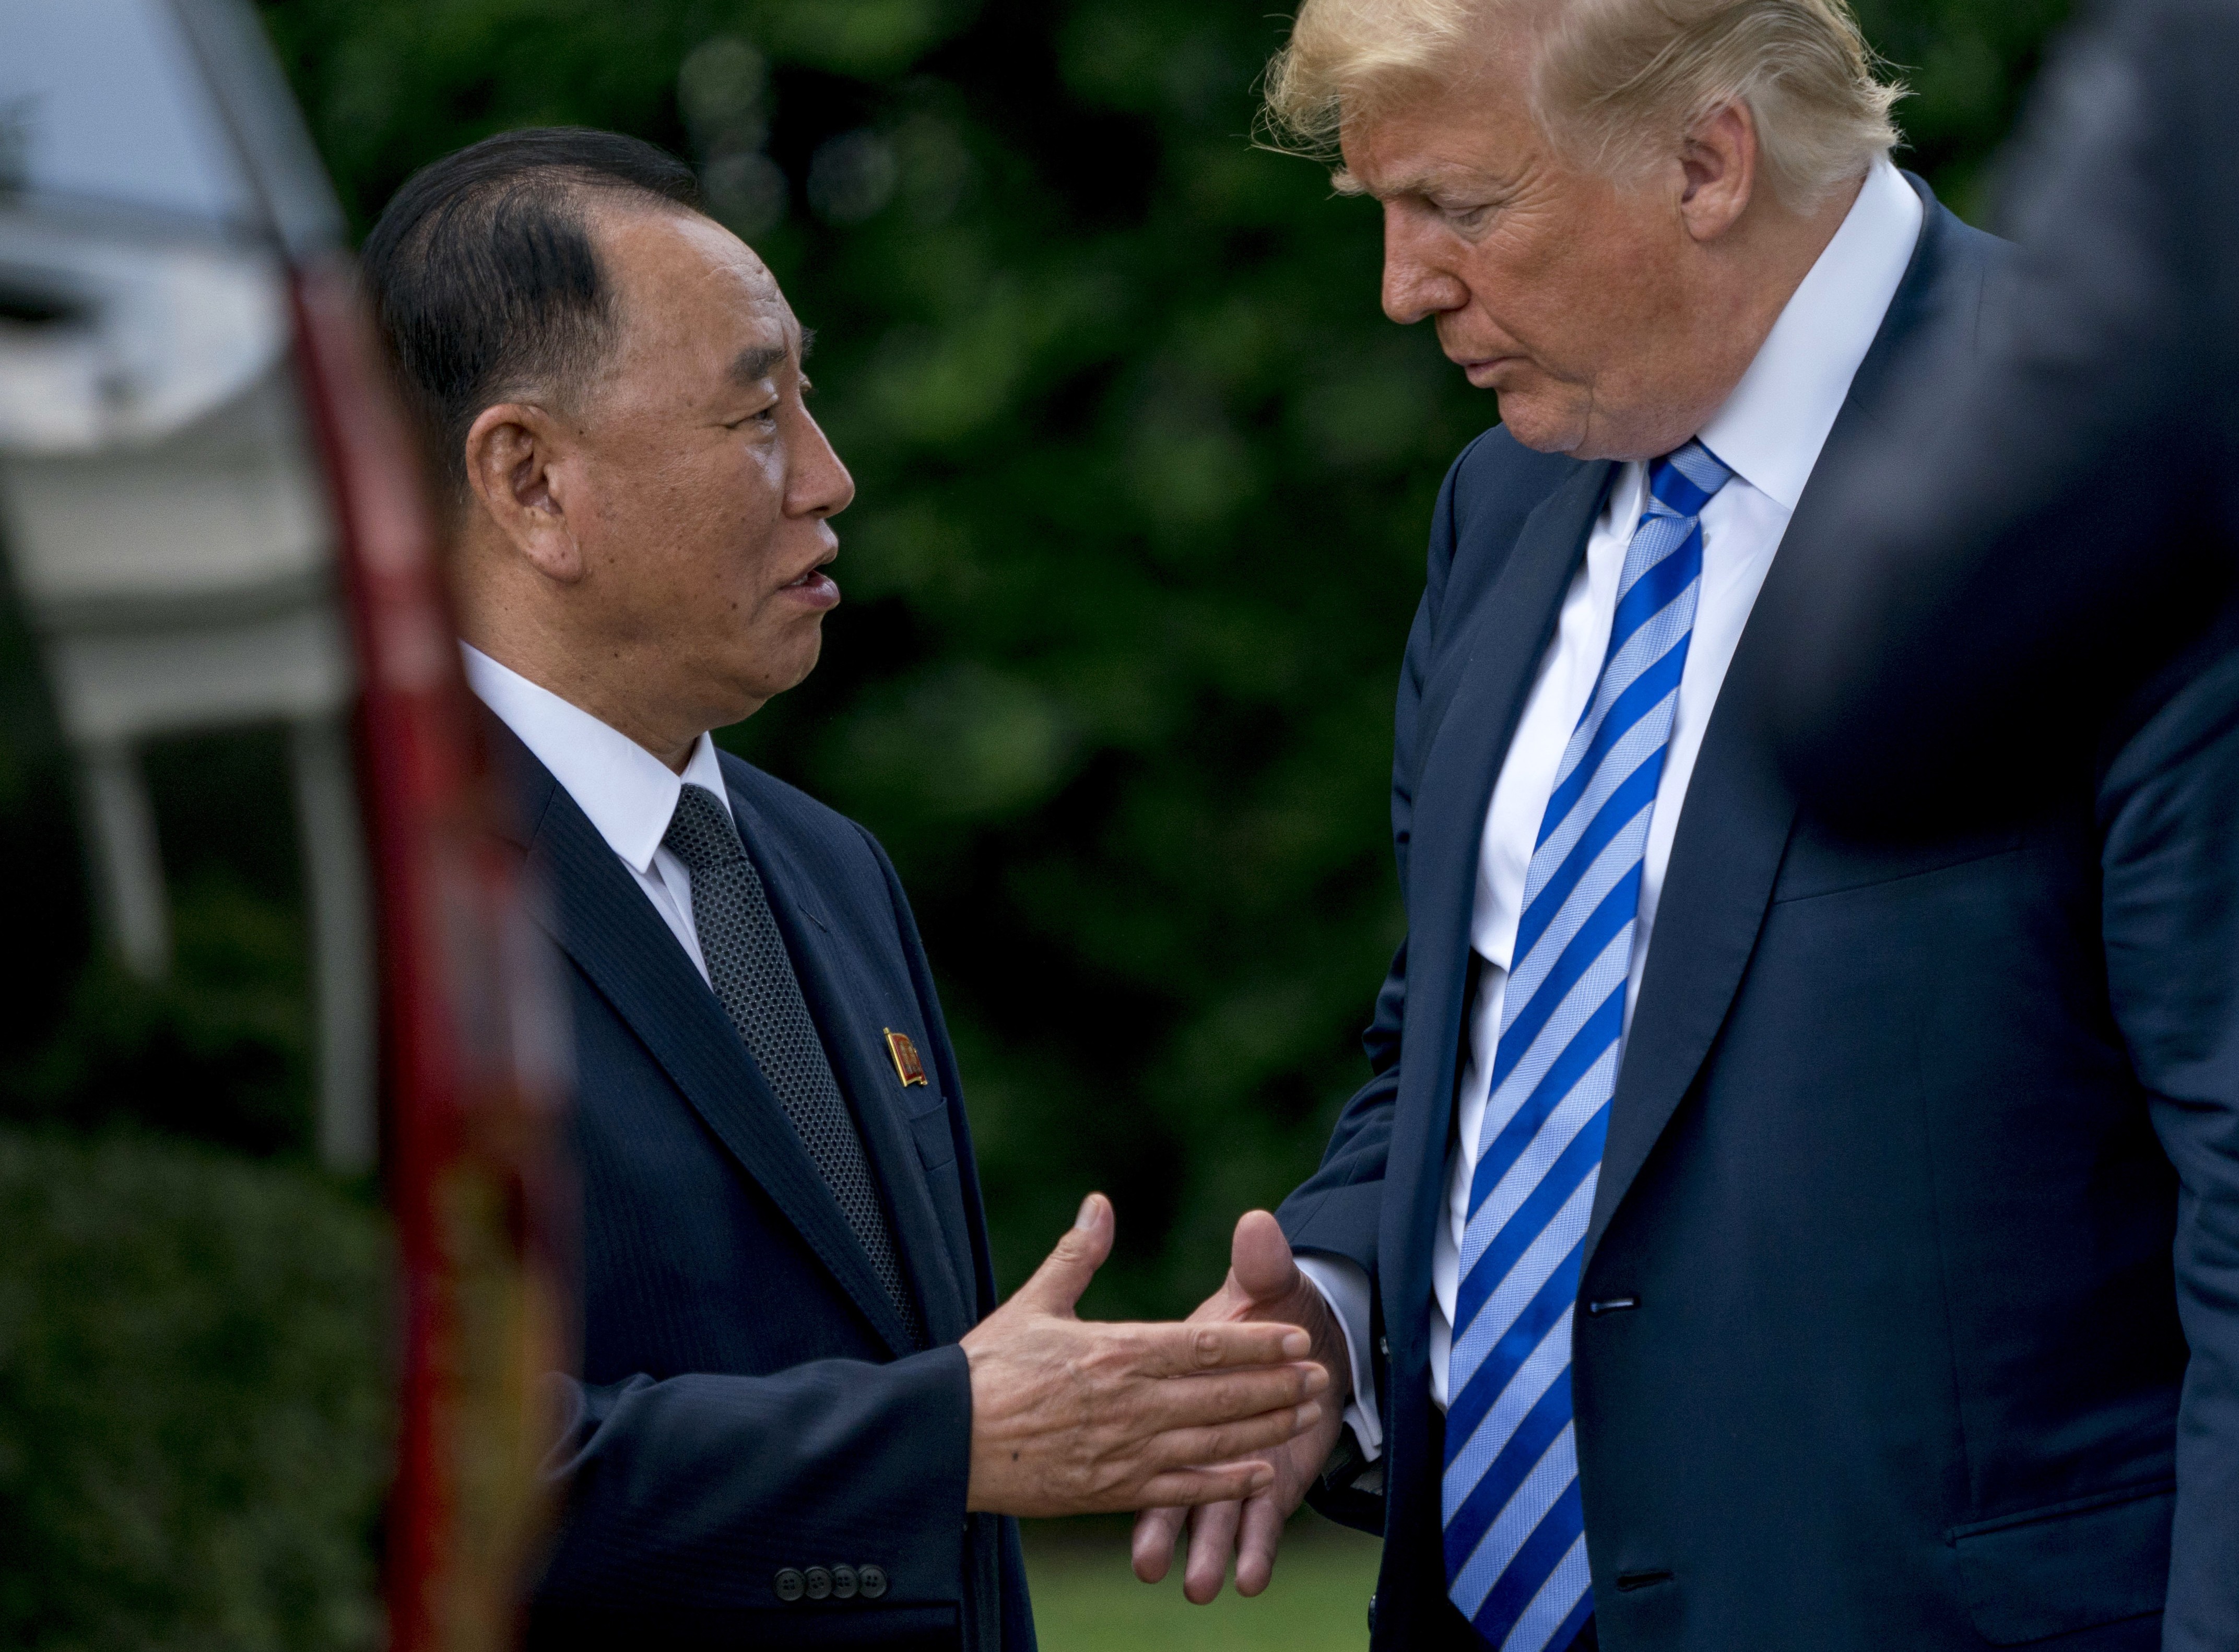 US President Donald Trump shakes hands with Kim Yong-chol, former North Korean military intelligence chief and one of leader Kim Jong-un’s closest aides, after their meeting at the White House in Washington on June 1. Trump is scheduled to meet Kim Jong-un in Singapore on June 12, but how the question of denuclearisation will be resolved is still unclear. Photo: AP